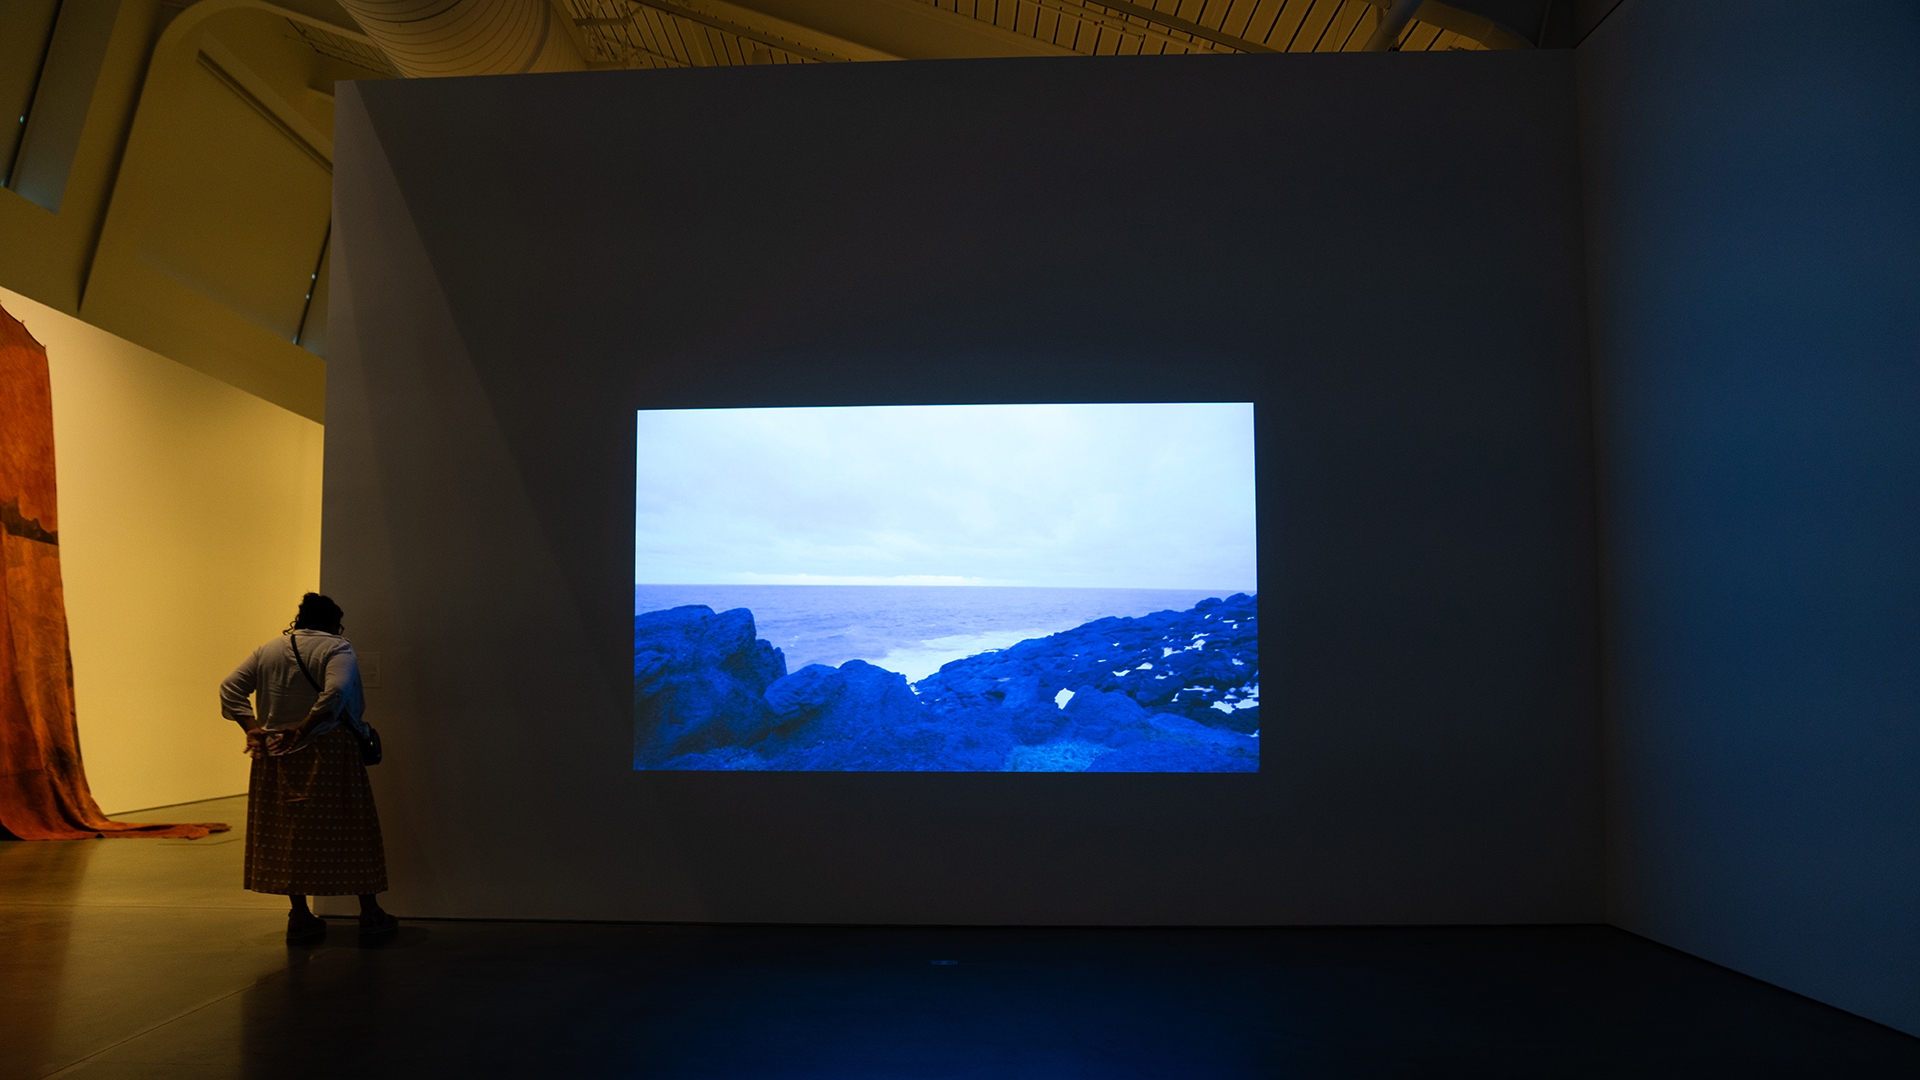 a person stands in a dark art gallery room next to a film projection on the wall